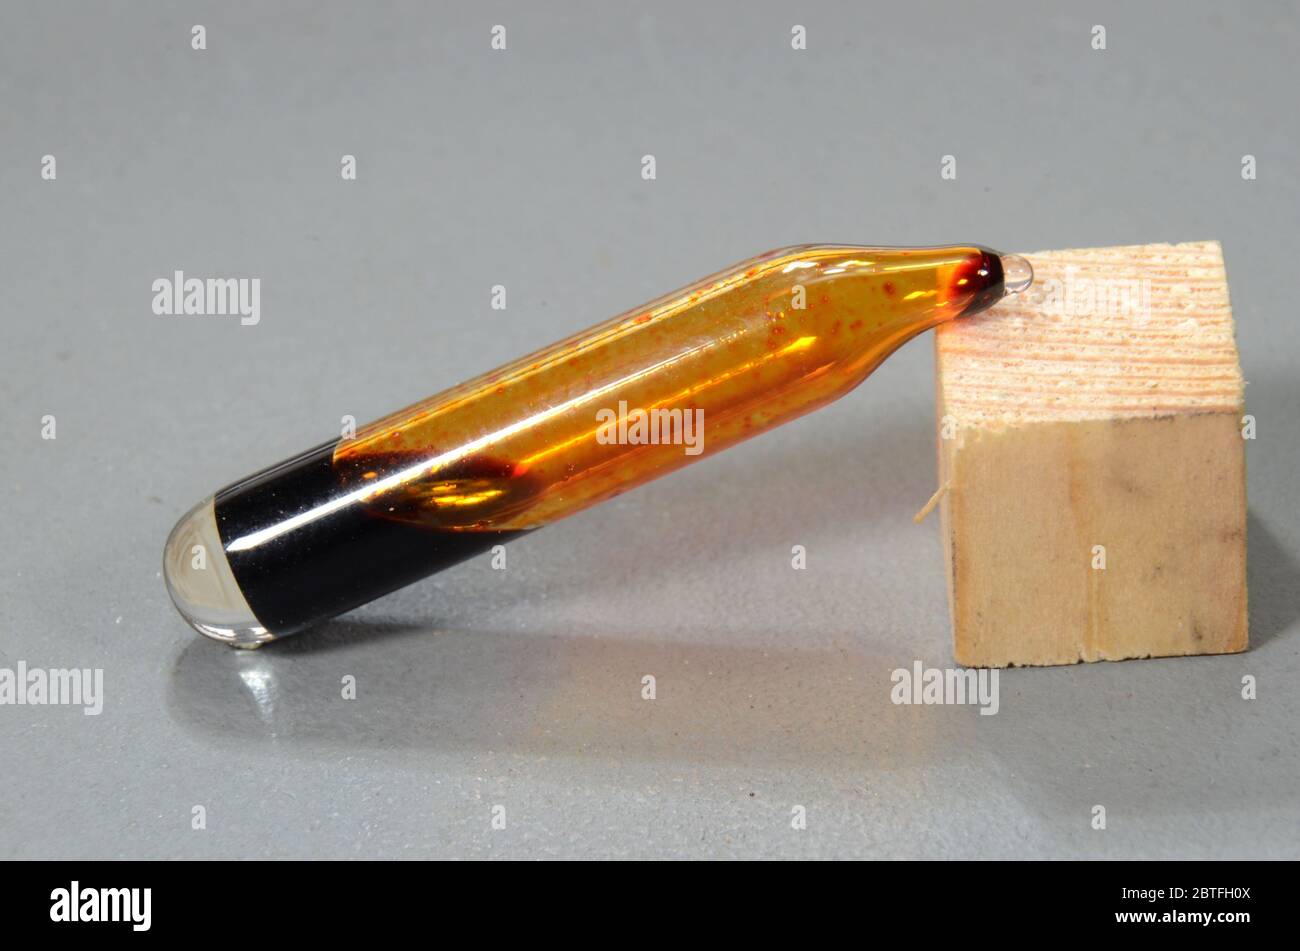 Macroview on ampoule with the element No 35 bromine (Br) in both liquid and vapor state. Stock Photo